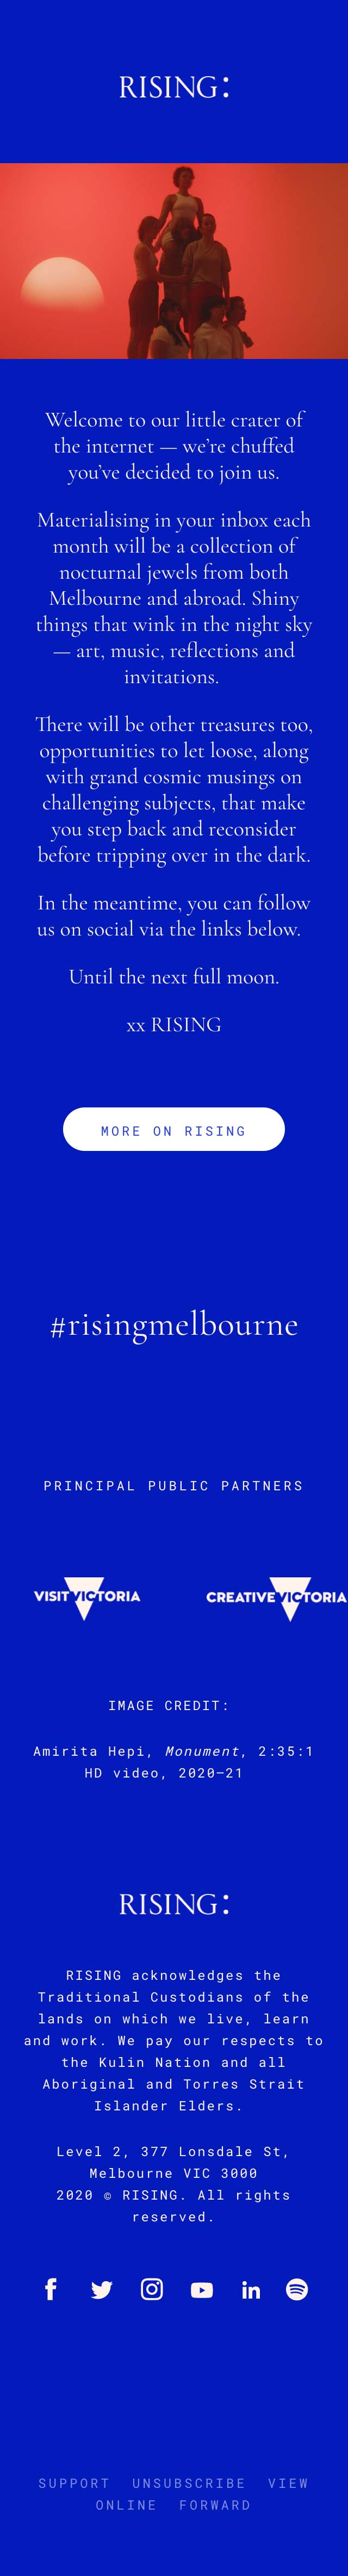 Welcome to RISING 🌕 - mobile view